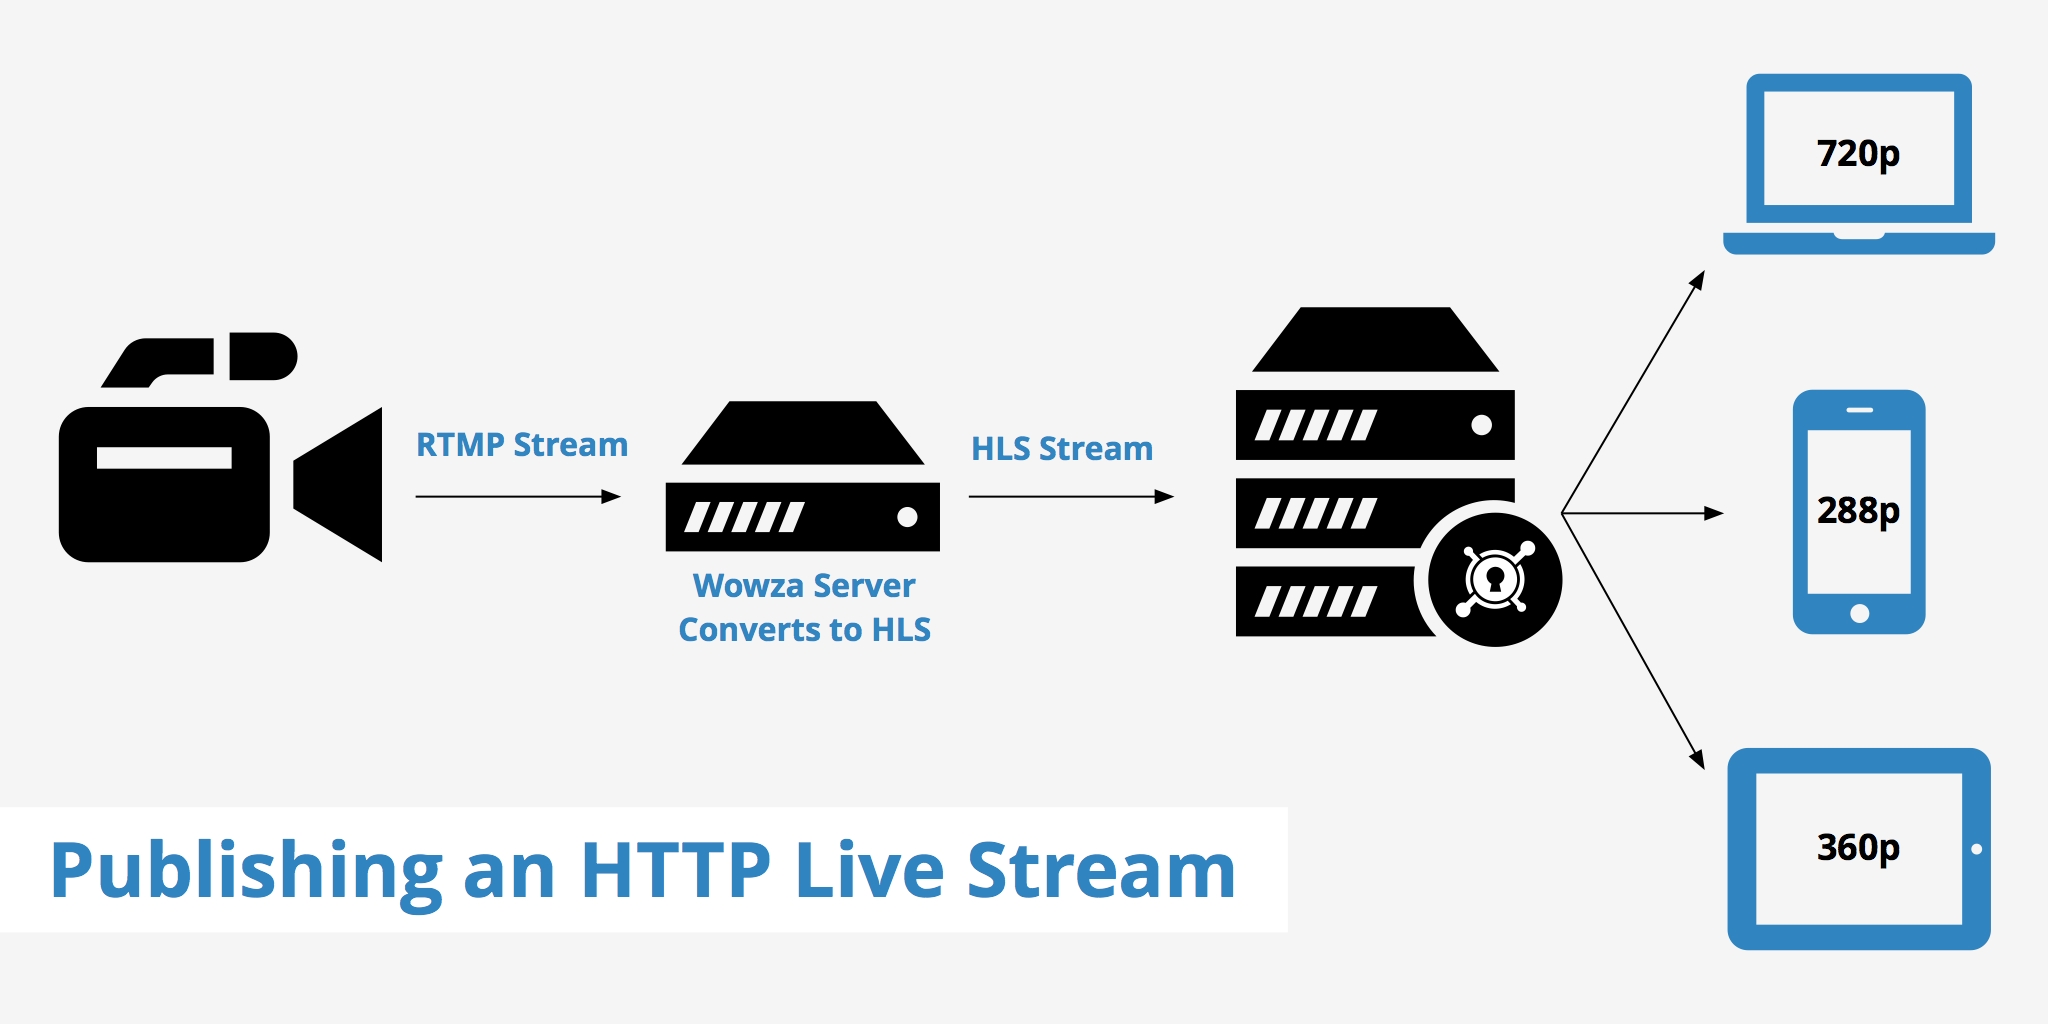 Publishing an HTTP Live Stream